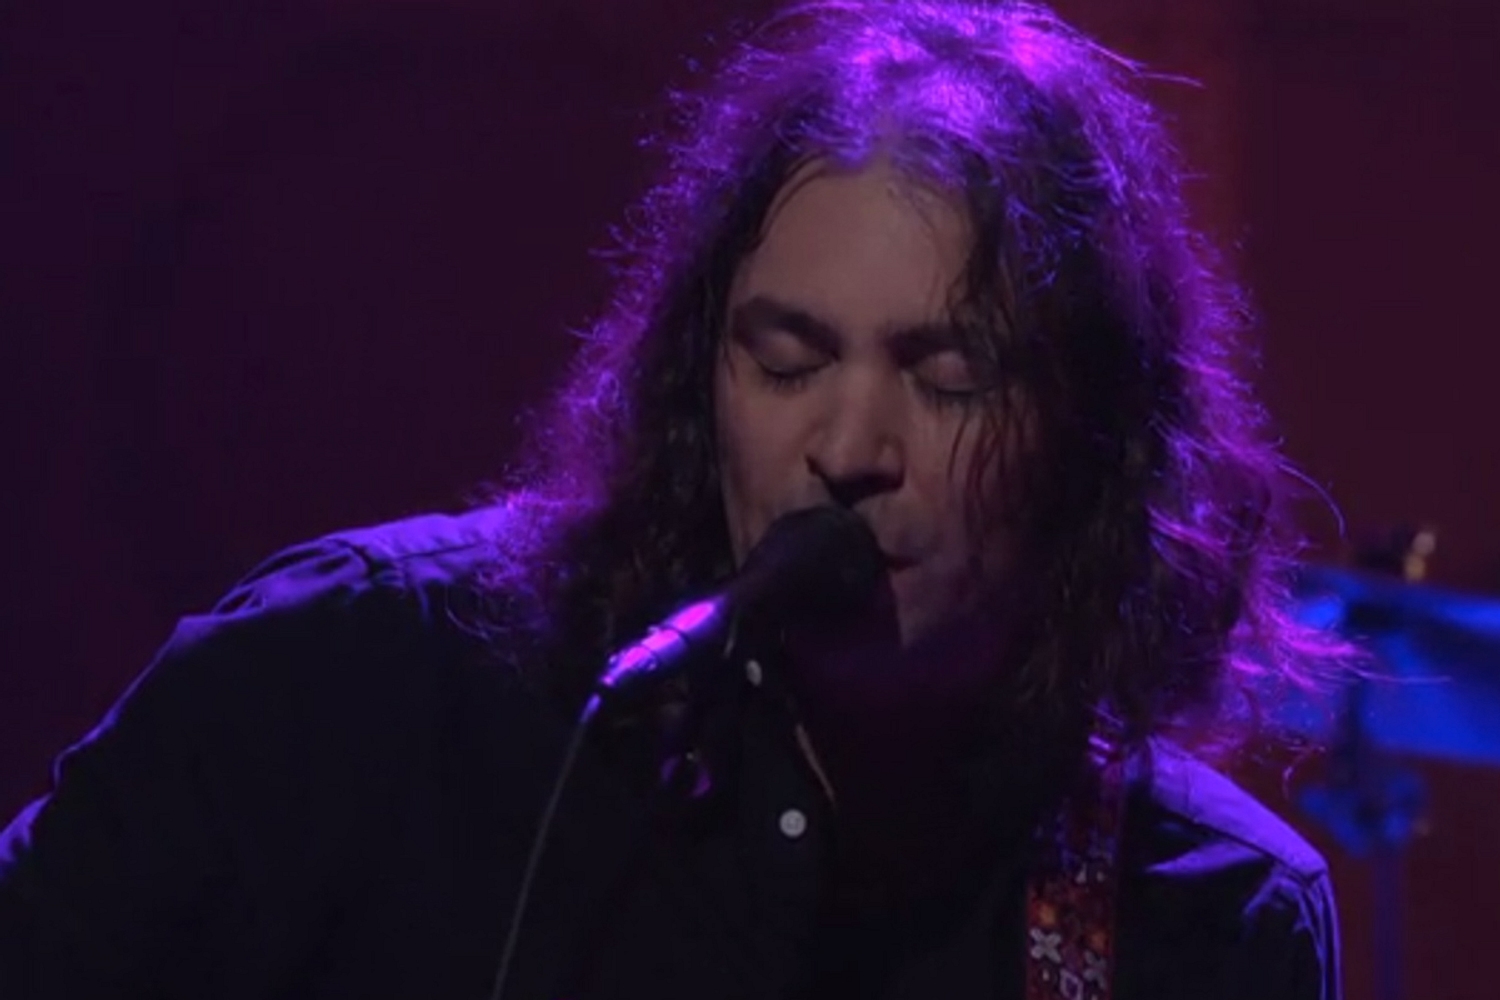 Watch The War on Drugs bring ‘Burning’ to Conan